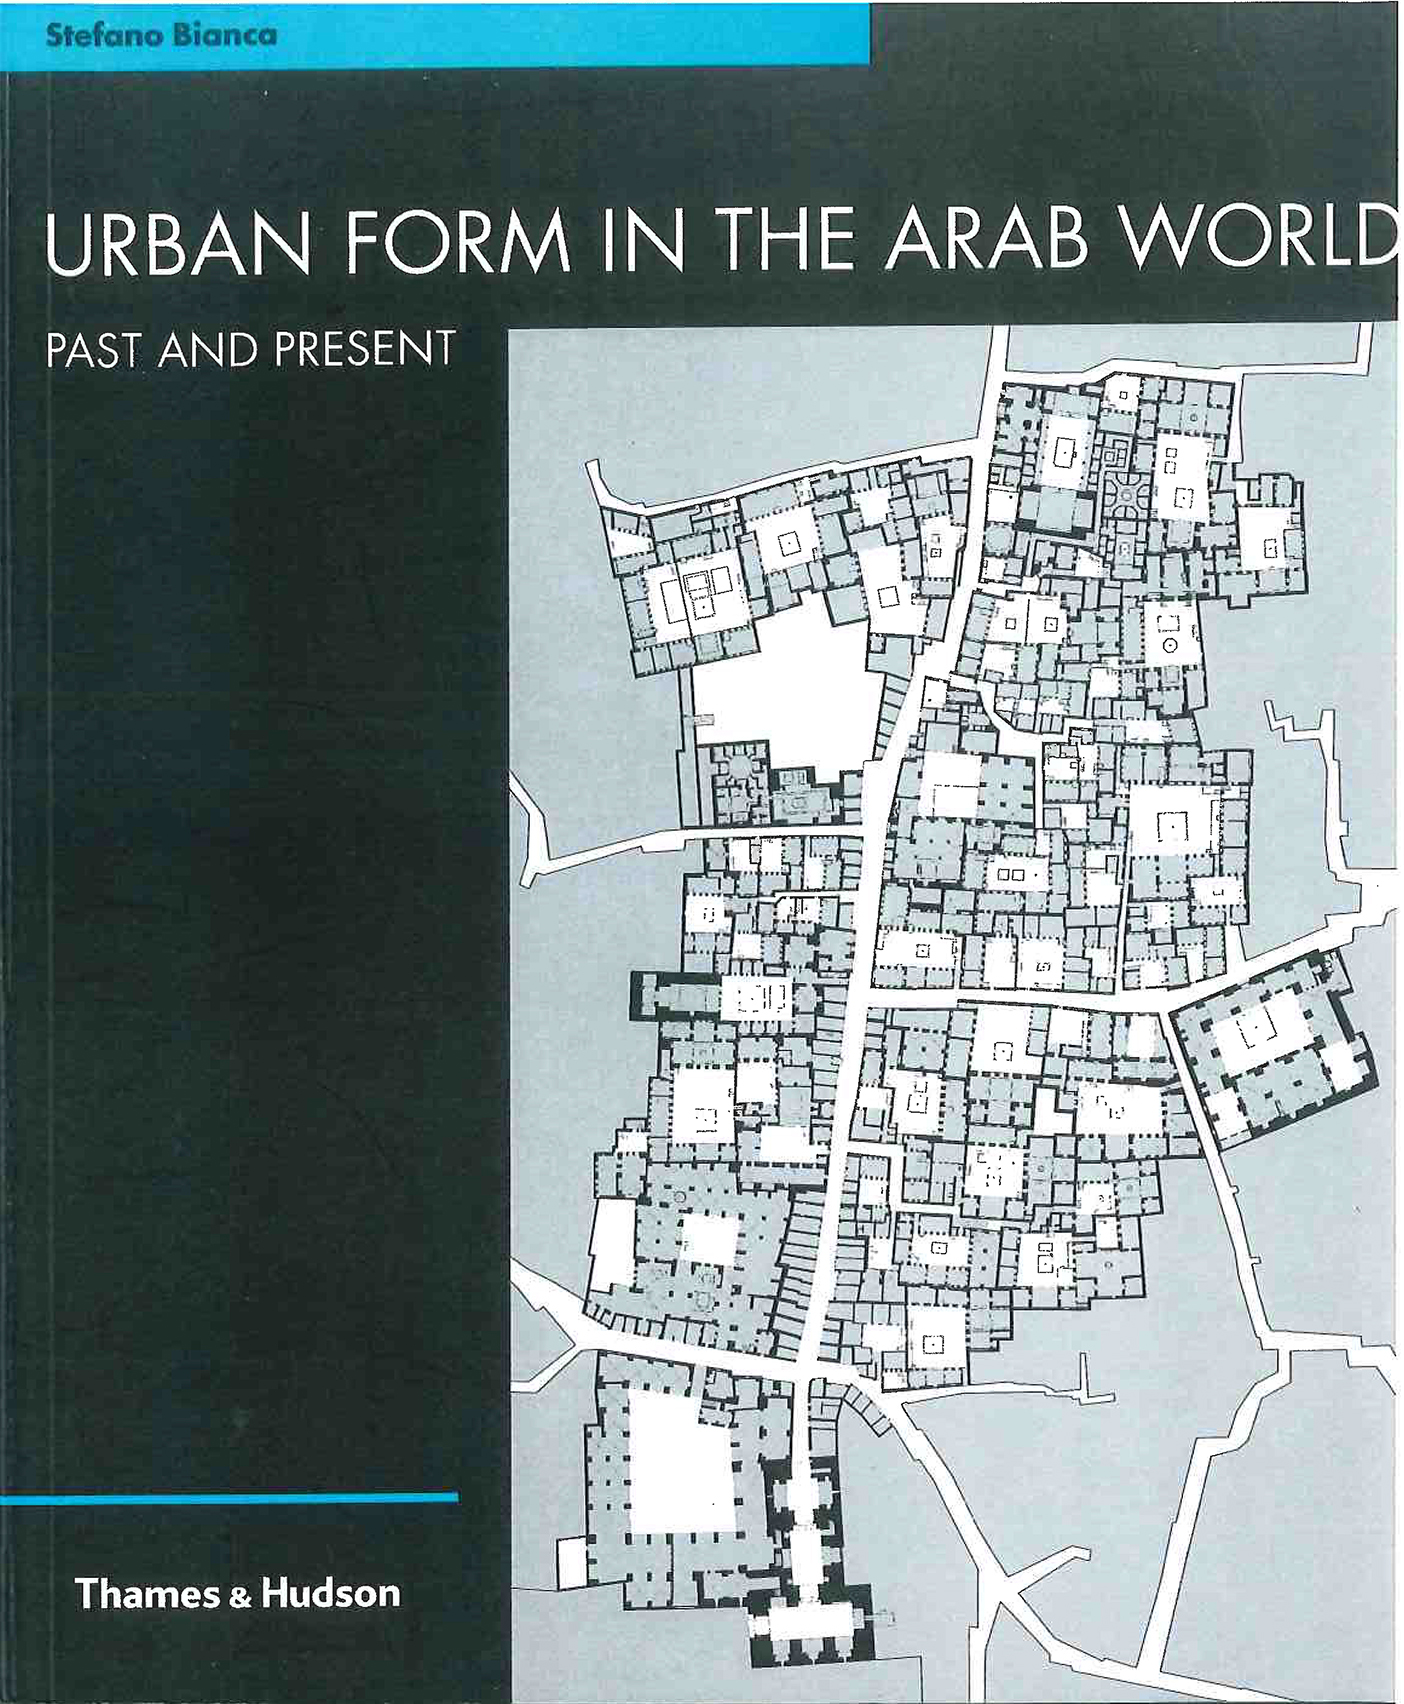 Stefano Bianca - <span style="font-style: italic;">Urban Form in the Arab World</span> presents a detailed survey of traditional urban structures in Arab-Islamic countries and an analysis of the problems that historic cities face as they confront modern development and Western technologies. Essential reading for architects and planners professionally involved in the Middle East, it will appeal to anyone interested in Islamic architecture and culture in general.<div><br></div><div>Stefano Bianca, an architectural historian and practicing urban designer, discusses a wide range of philosophical and technical issues, bridging past and present and drawing upon his thorough knowledge of the field.</div><div>In contrast to the many books on Islamic architecture that focus on isolated historic monuments,&nbsp;<span style="font-style: italic;">Urban Form in the Arab World</span>&nbsp;describes the complete urban fabric, with its houses, mosques, public facilities, streets and markets. Basic architectural forms are explained in relation to how they are used, as well as in terms of their general cultural background and pre-islamic precedents. The conflicts between traditional Islamic models and Western planning methods are explored, and case studies of Mecca, Baghdad, Fez and Aleppo show how practical solutions can be found to problems faced by architects trying to preserve both local cultural identity and the historic patterns of cities. The rich visual documentation includes maps, plans and photographs, many previously unpublished.</div>